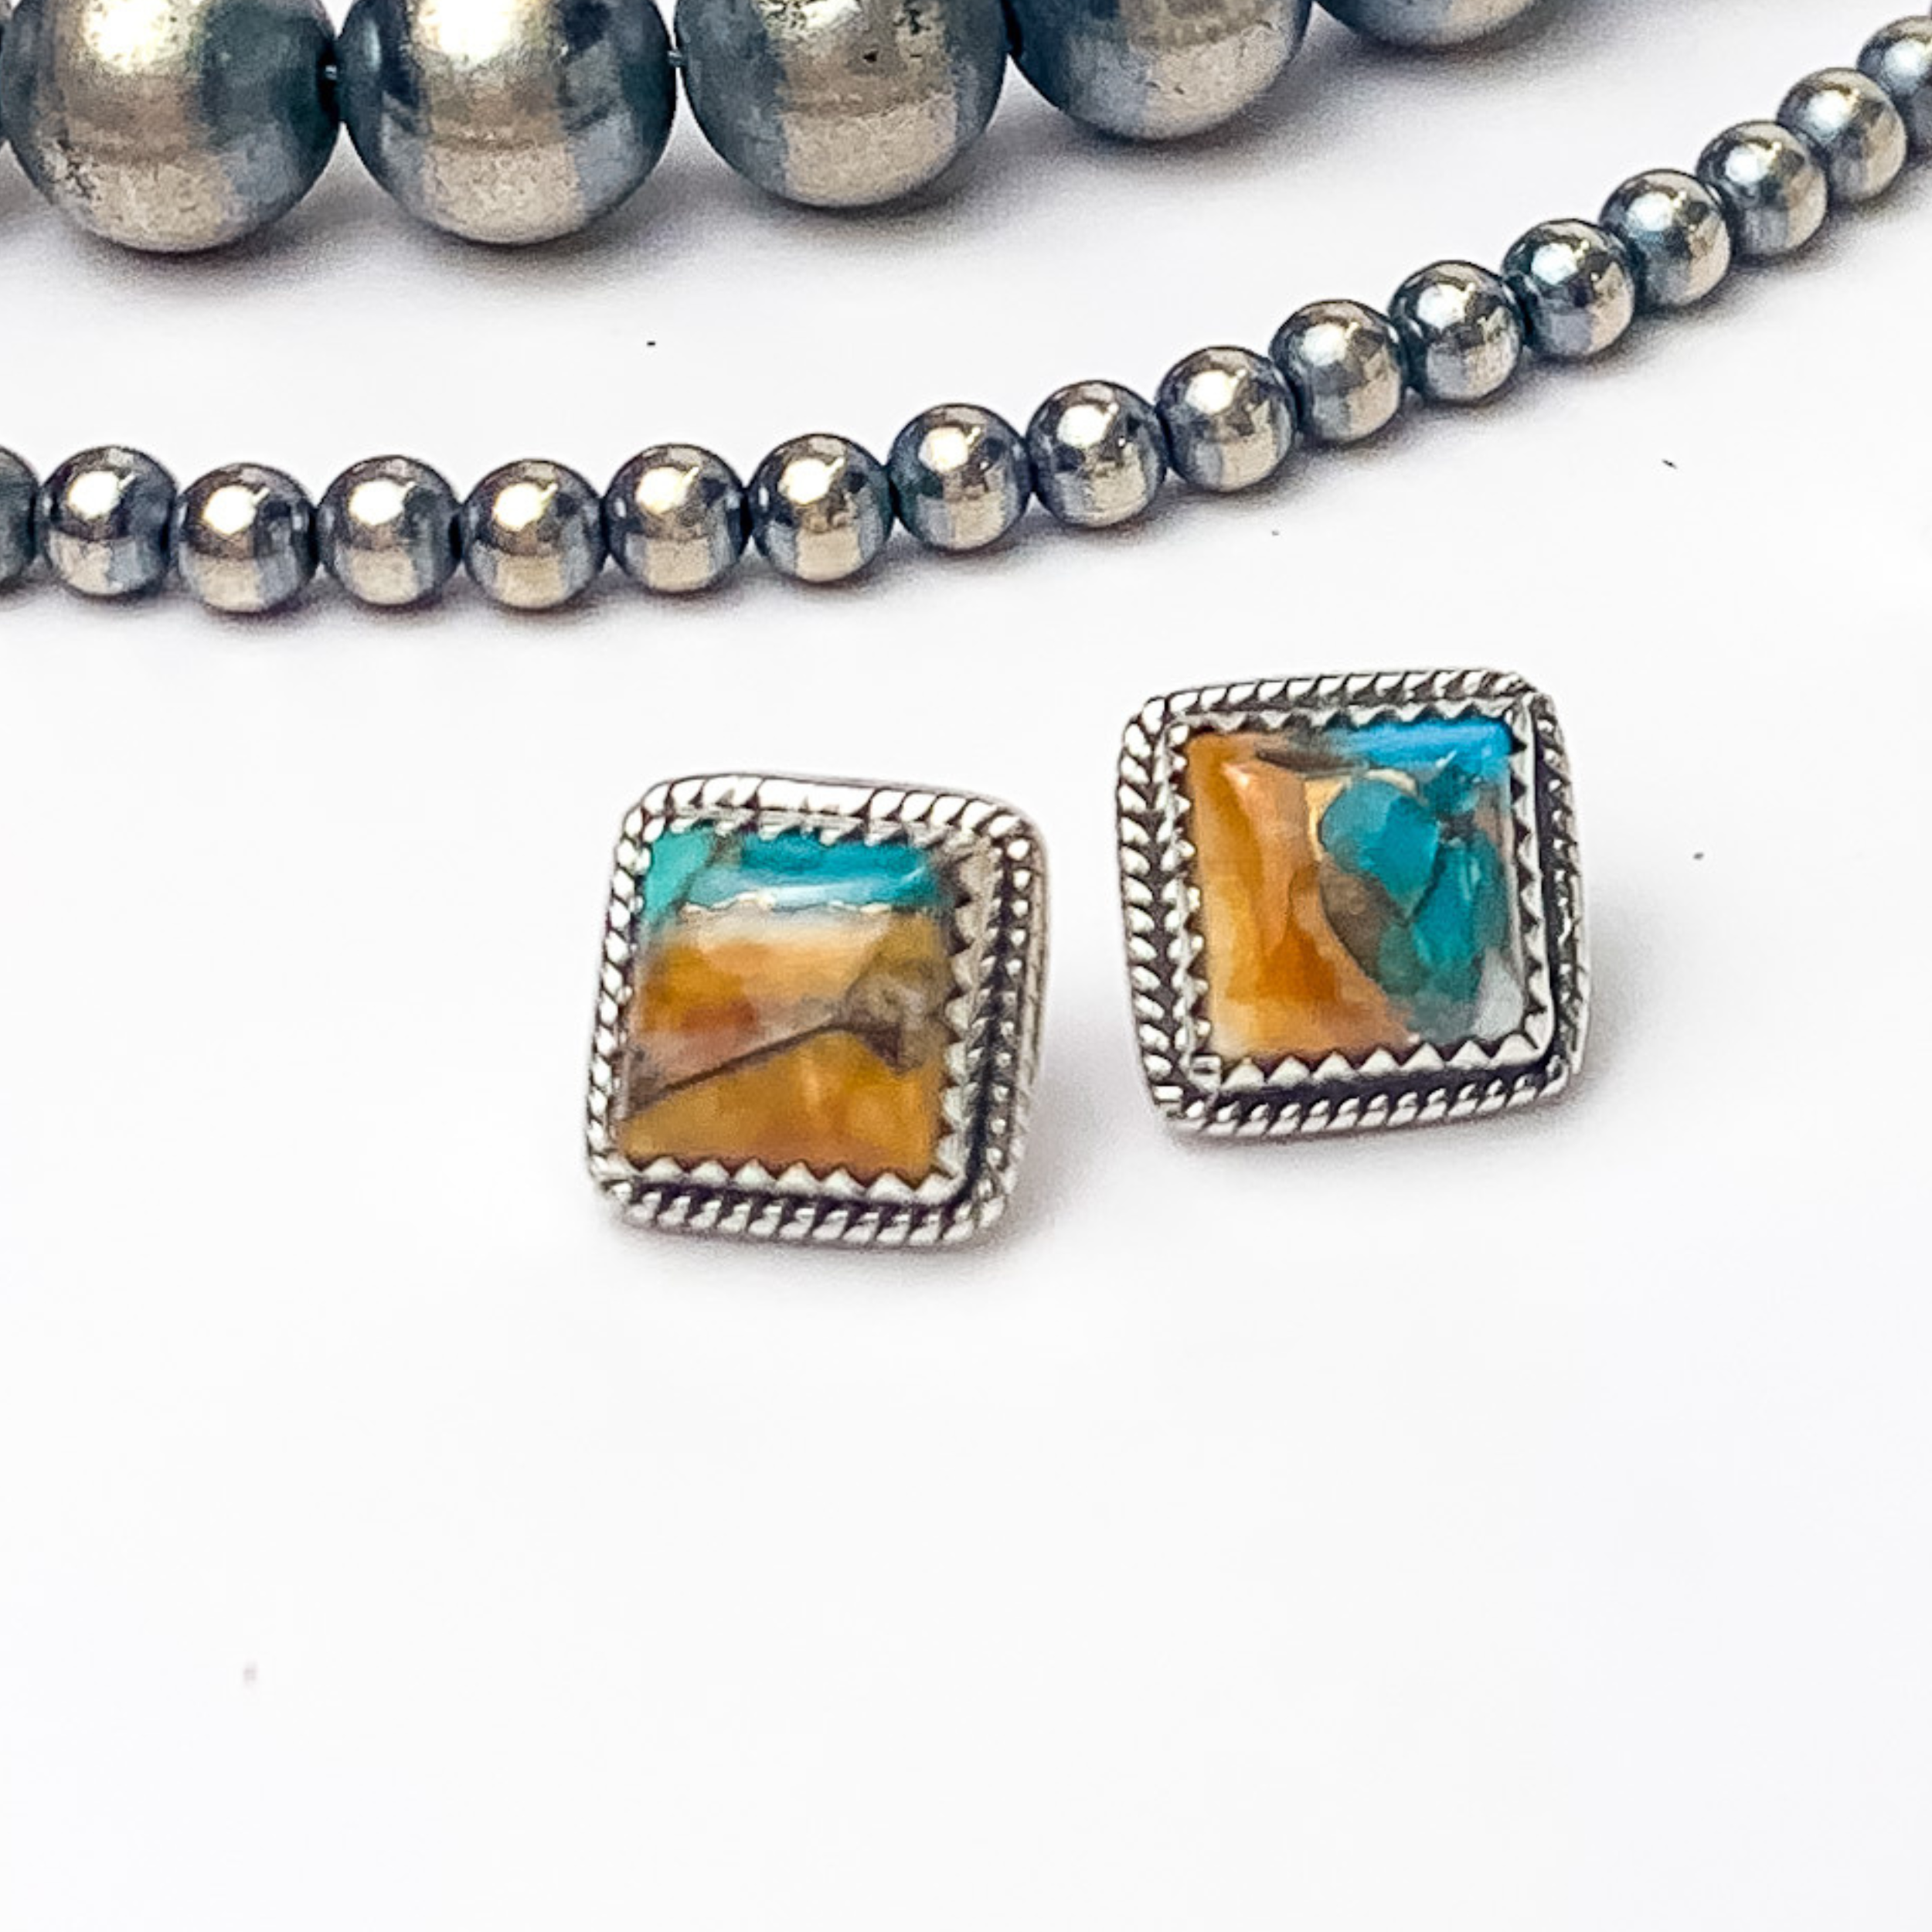 In the picture are handmade sterling silver square stud earrings with spiny turquoise remix stones with a white background